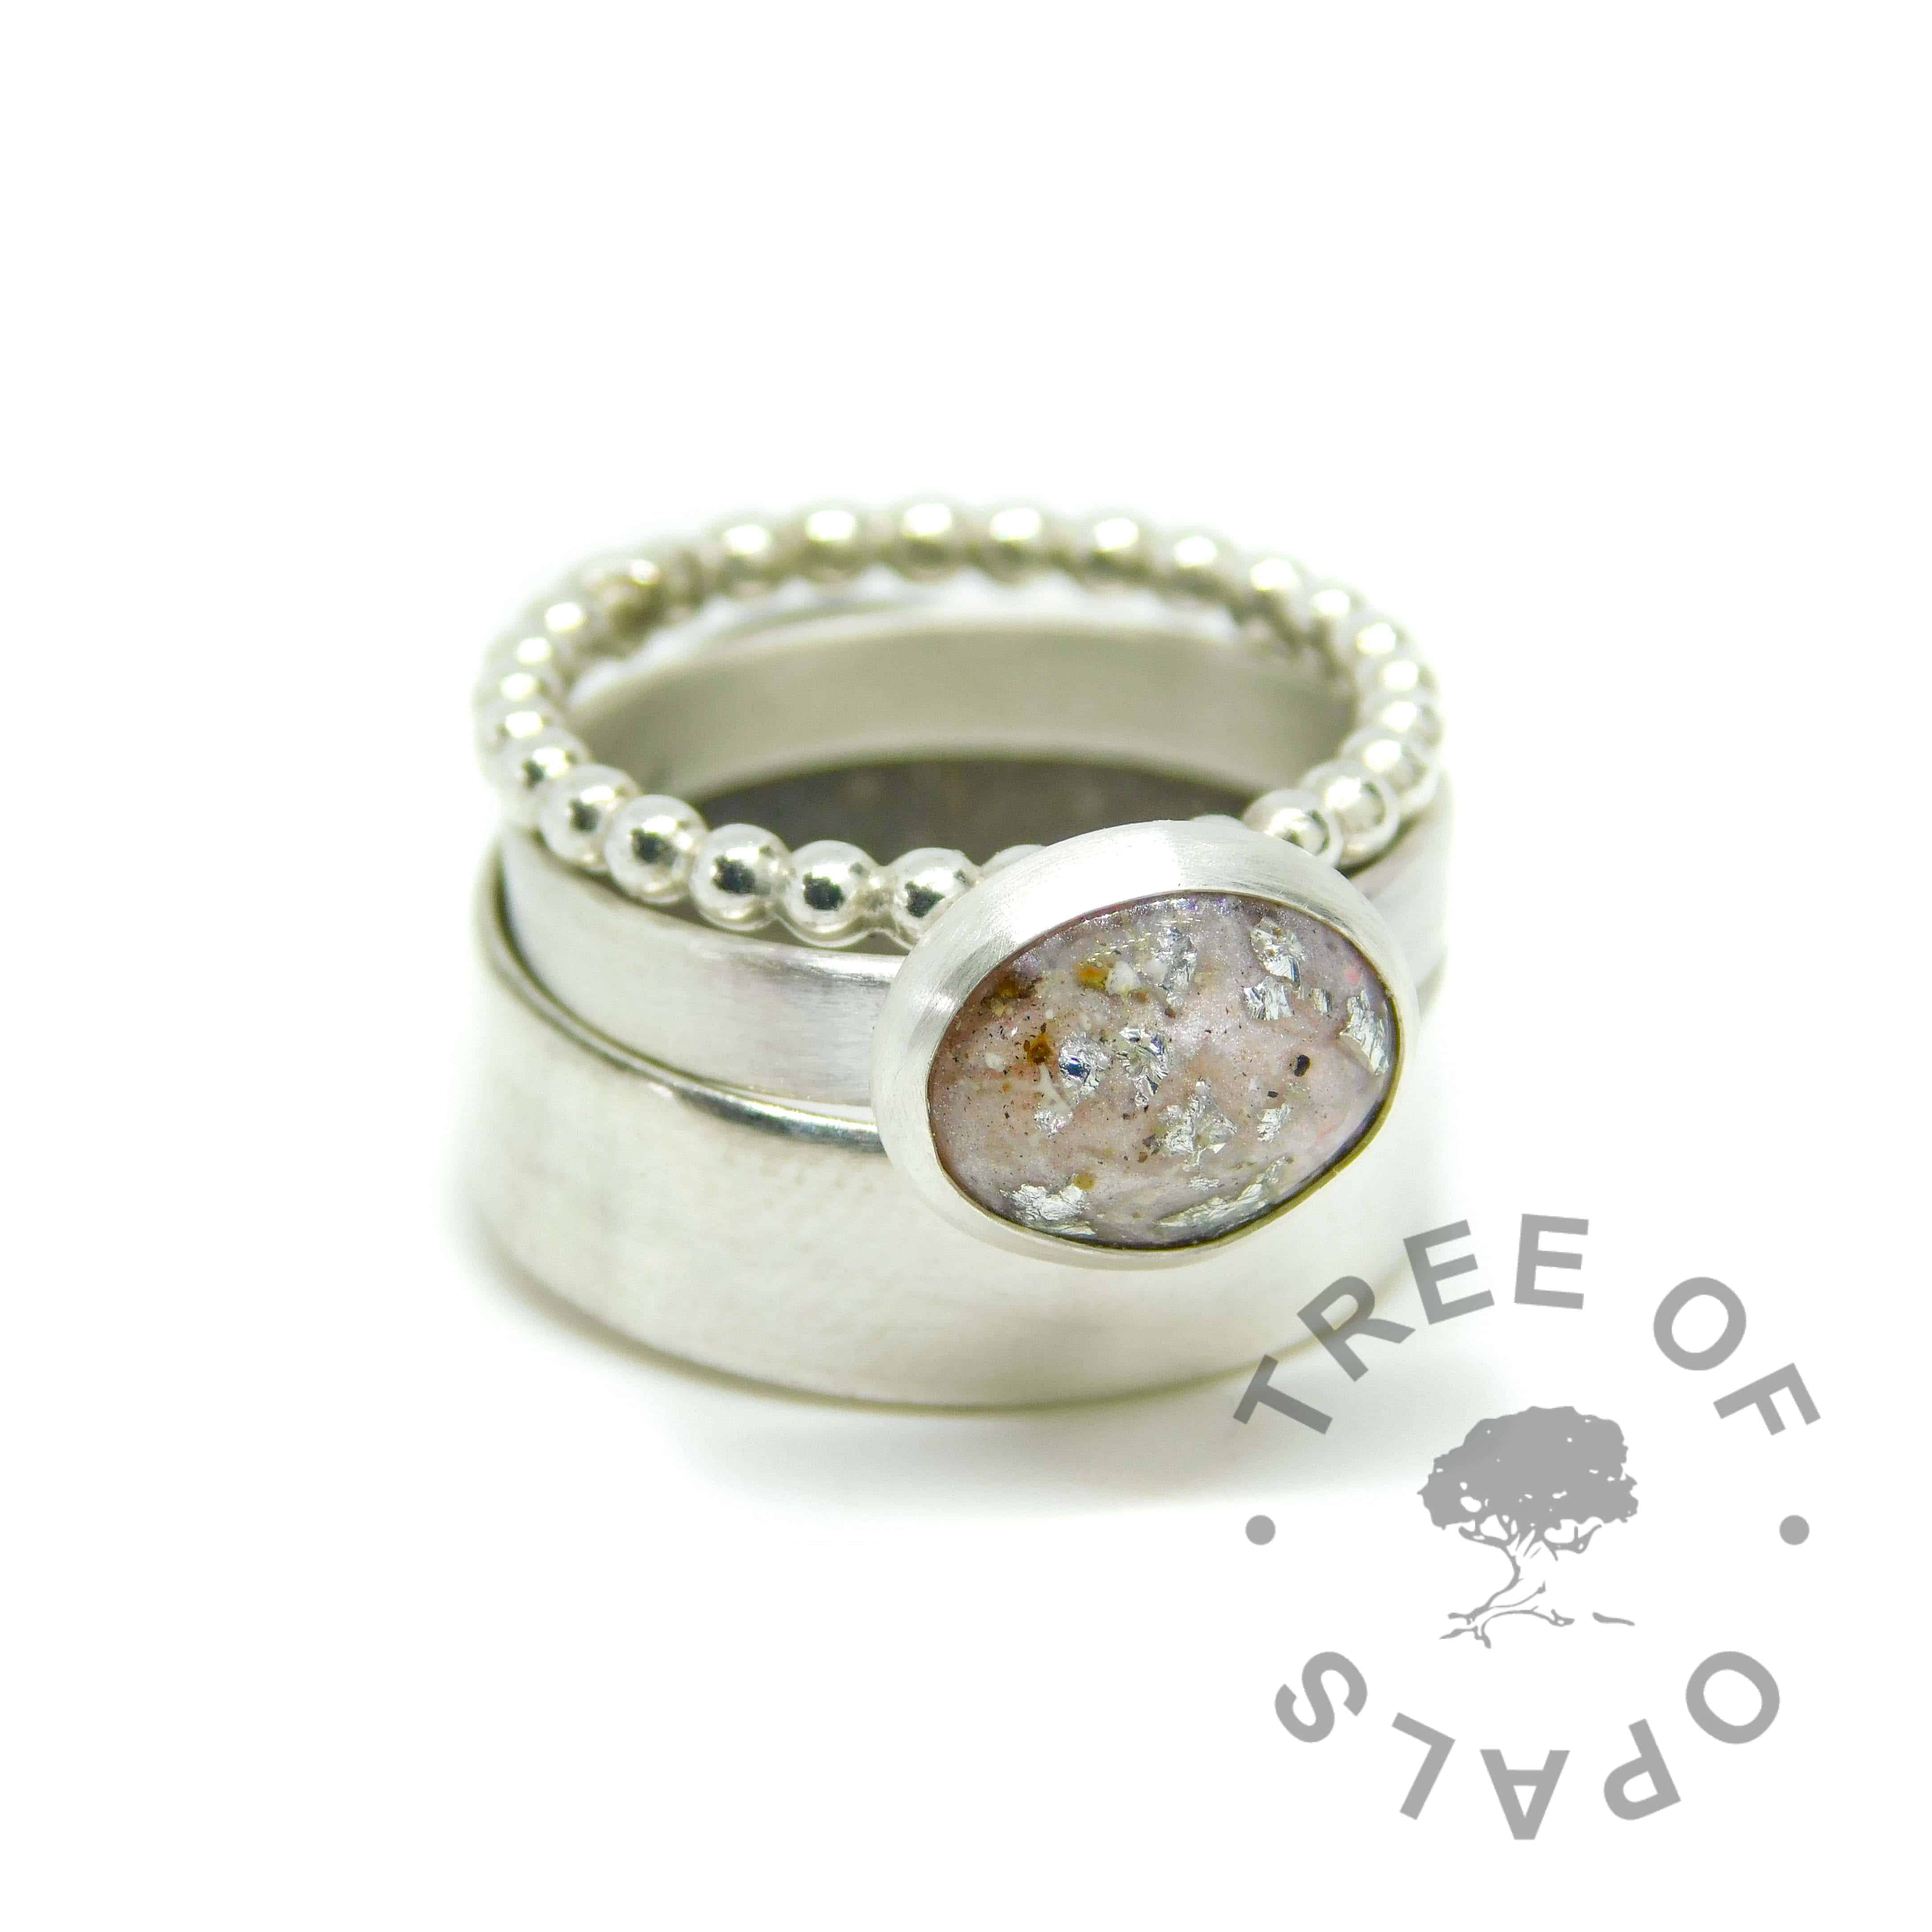 ring stack with fairy pink cremation ash ring with silver leaf on brushed wire band with bubble wire and 6mm wide shiny stacking rings (cremation ash ring). Solid 925 sterling EcoSilver and 935 argentium silver handmade rings. 10x8mm bezel cup rubbed over the cabochon for security.